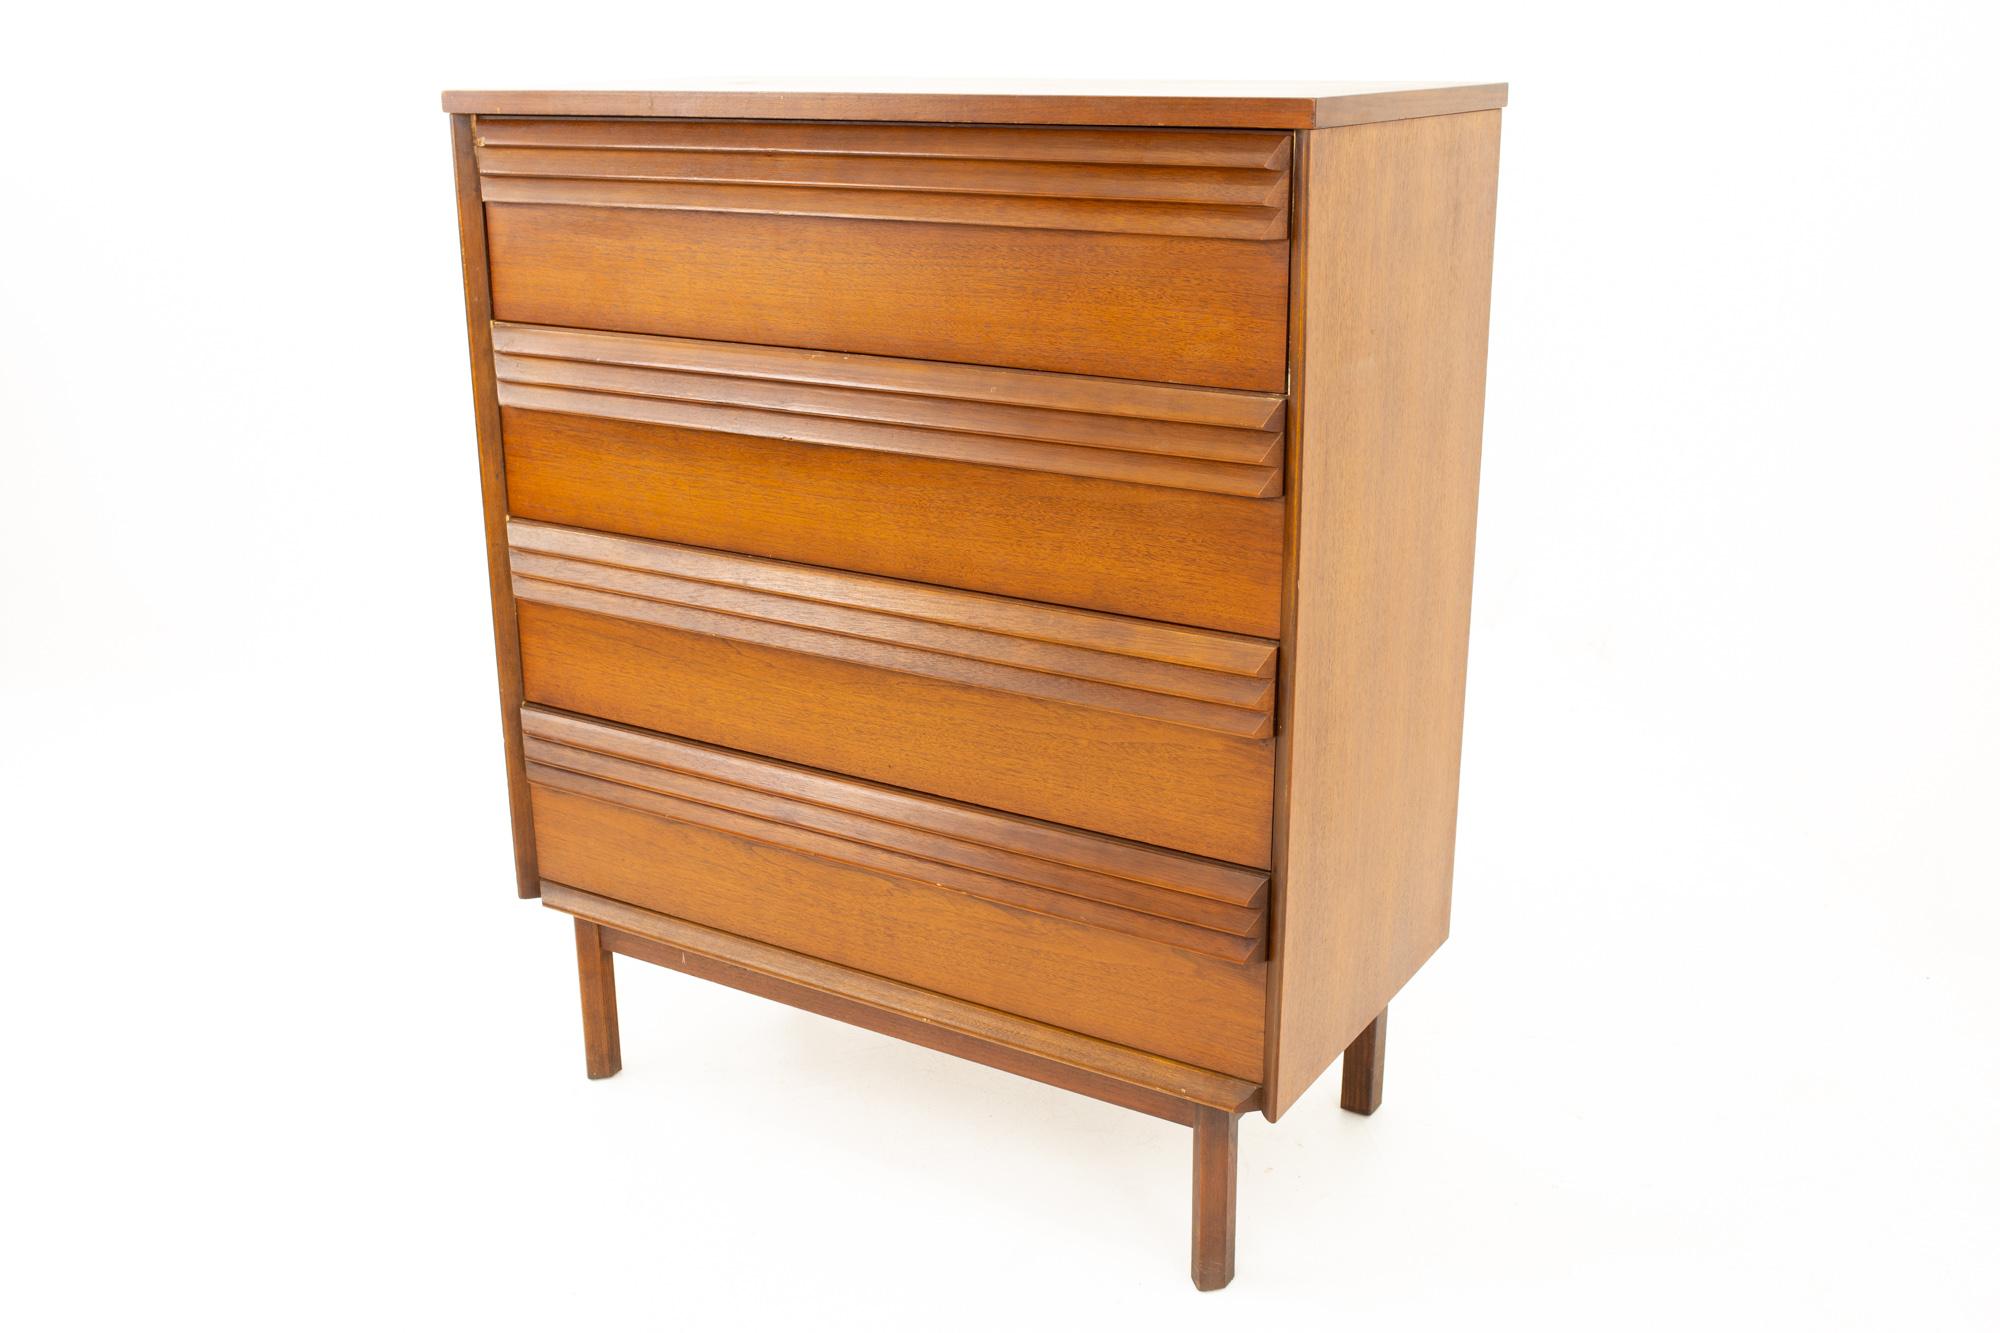 Bassett Mid Century louvered walnut 4 drawer highboy dresser
Dresser measures: 38.5 wide x 18.5 deep x 44 high

All pieces of furniture can be had in what we call restored vintage condition. That means the piece is restored upon purchase so it’s